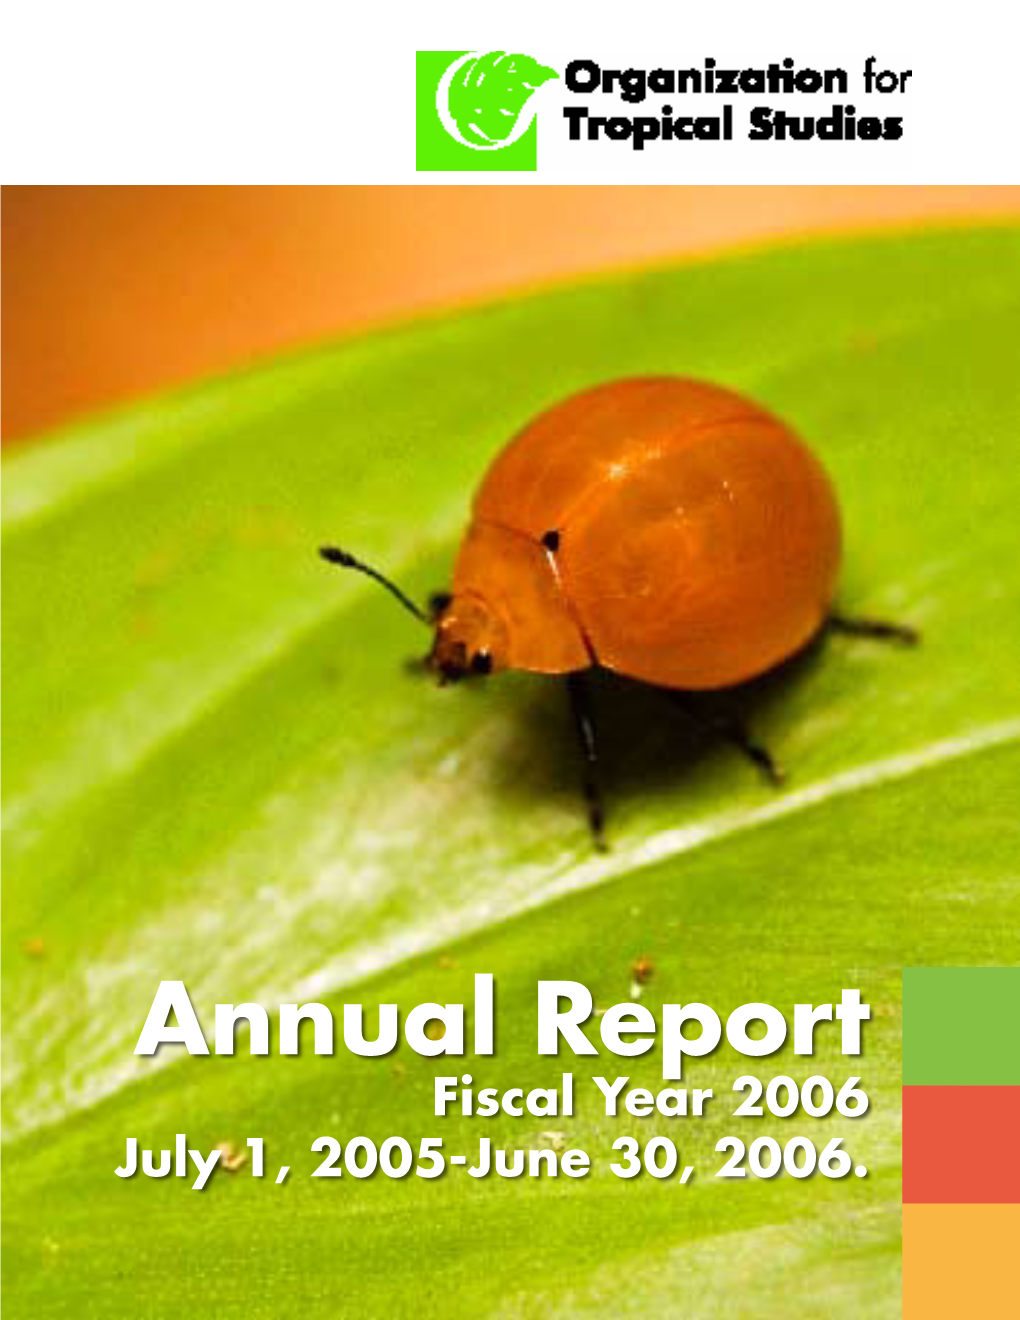 Annual Report Fiscal Year 2006 July 1, 2005-June 30, 2006